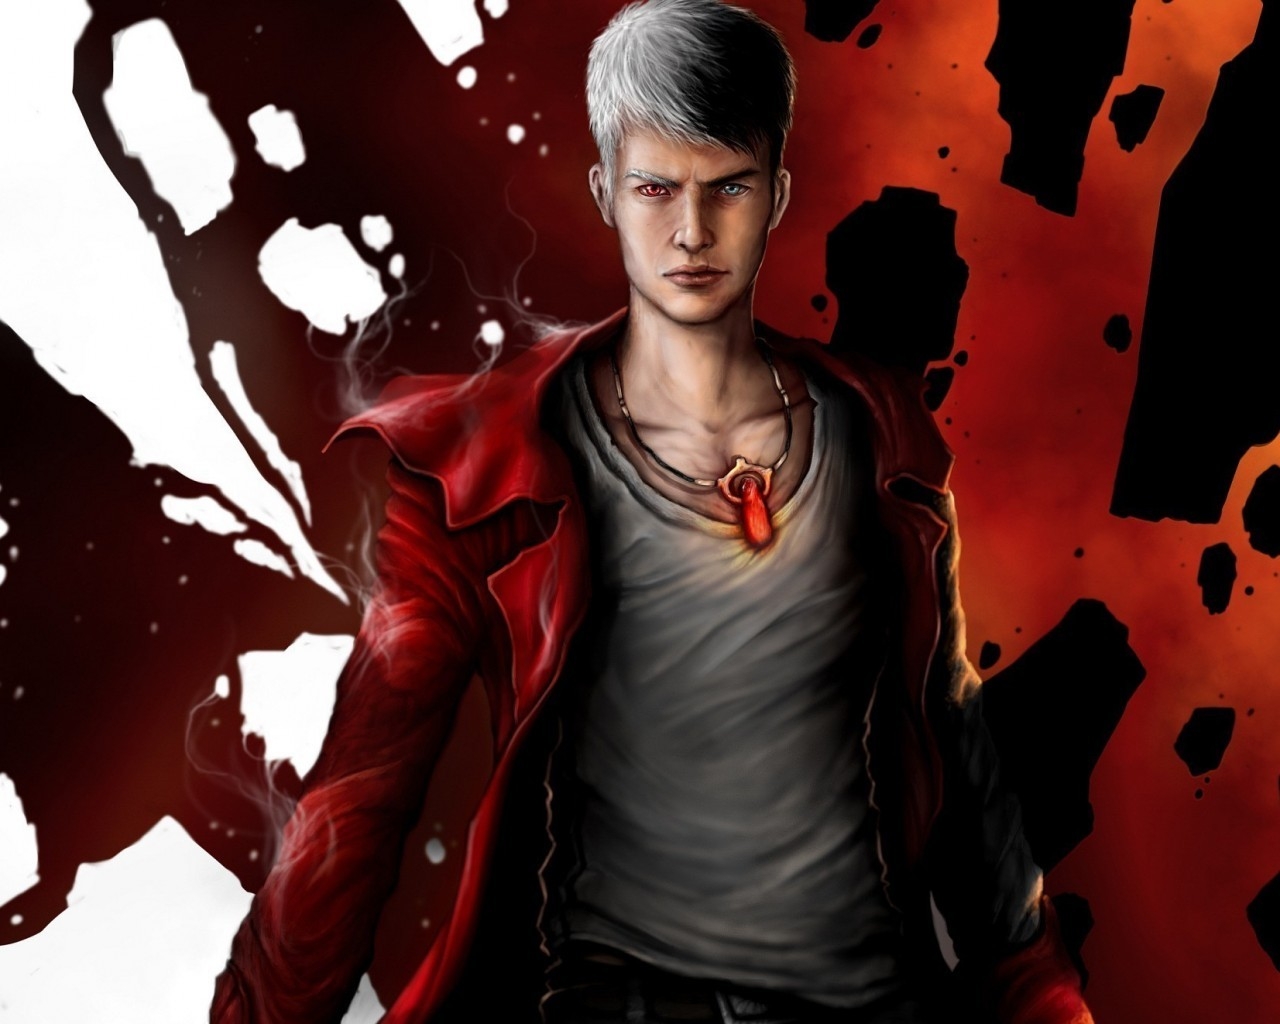 Dante Devil May Cry for 1280 x 1024 resolution